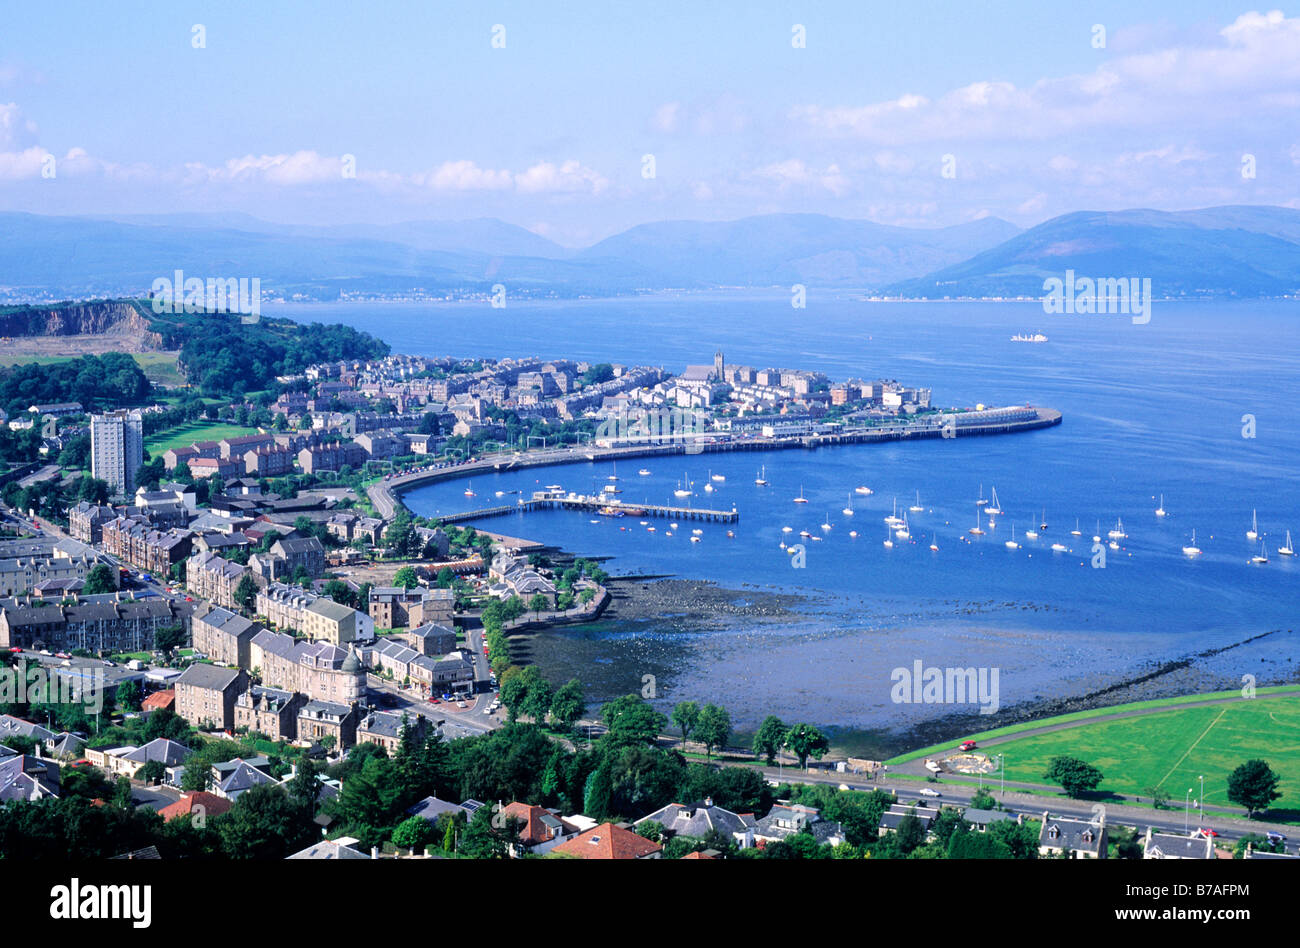 Gourock and Firth of Clyde, Scotland UK Clydeside Scottish town port harbour UK townscape seascape landscape view scenery boats Stock Photo